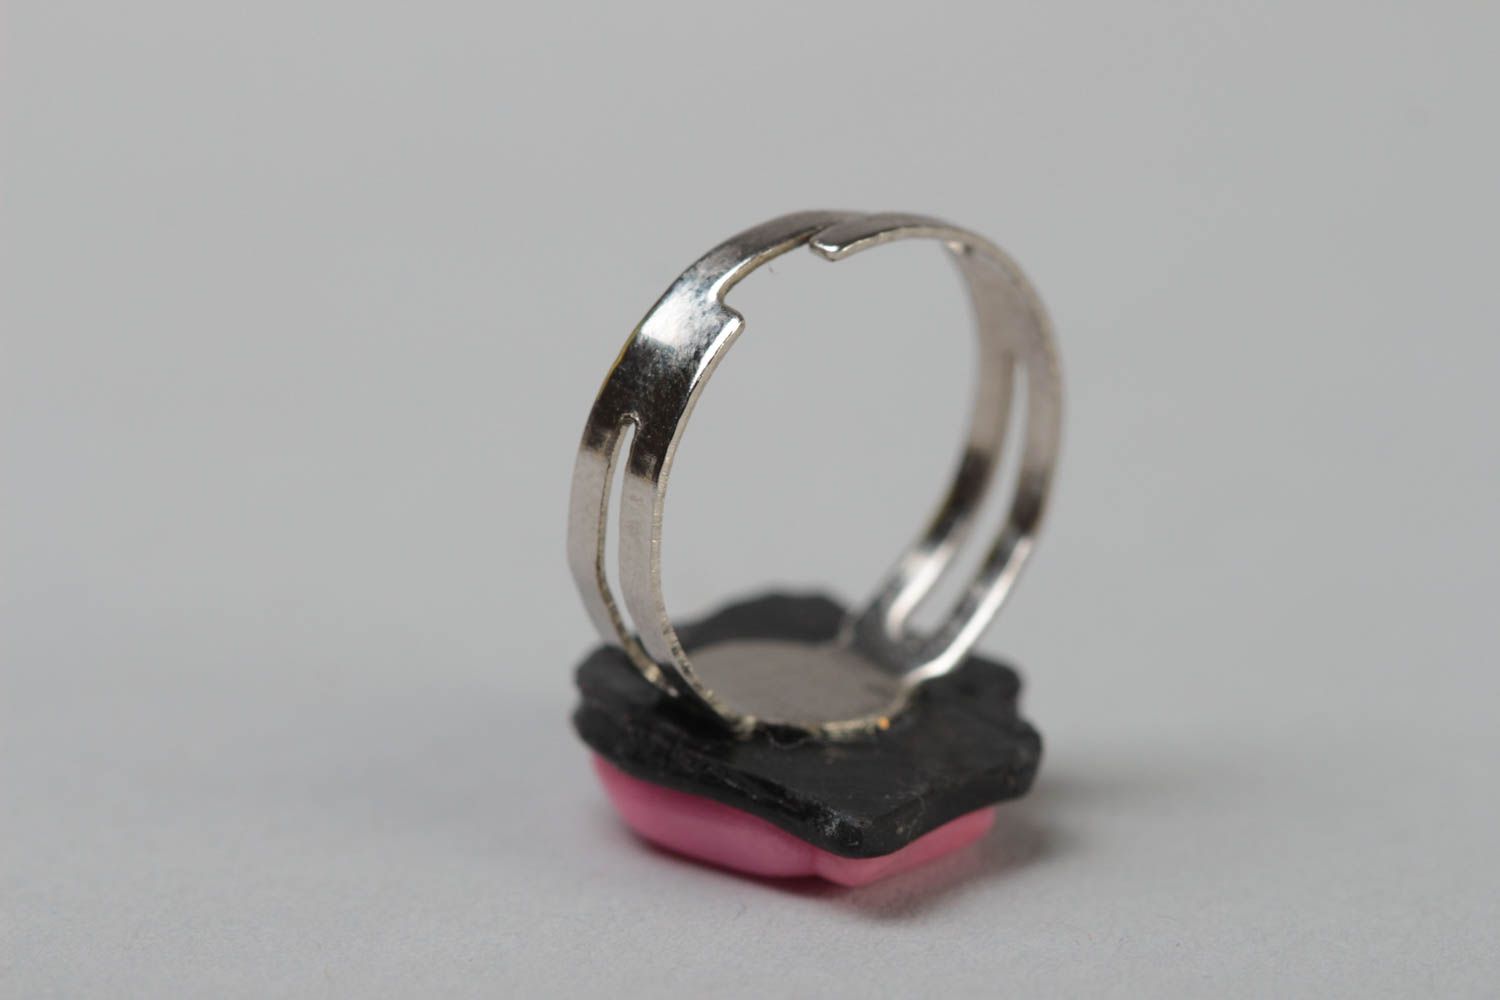 Handmade designer polymer clay jewelry ring with metal basis bright pink lips photo 4